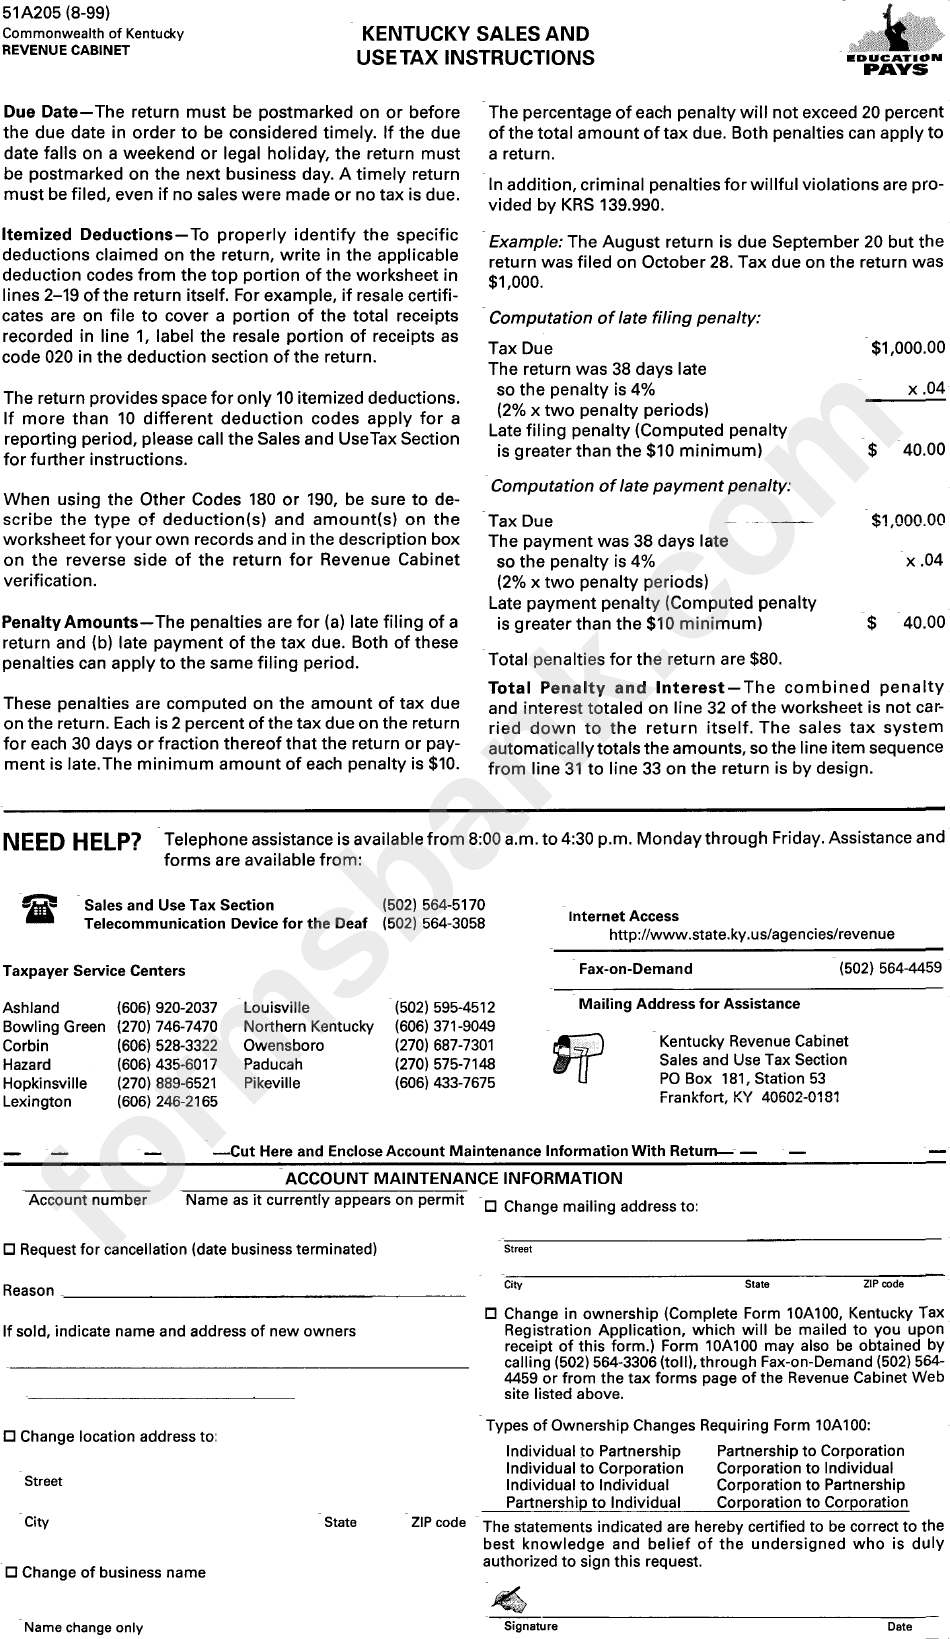 Form 51a205 Kentucky Sales And Use Tax Instructions printable pdf